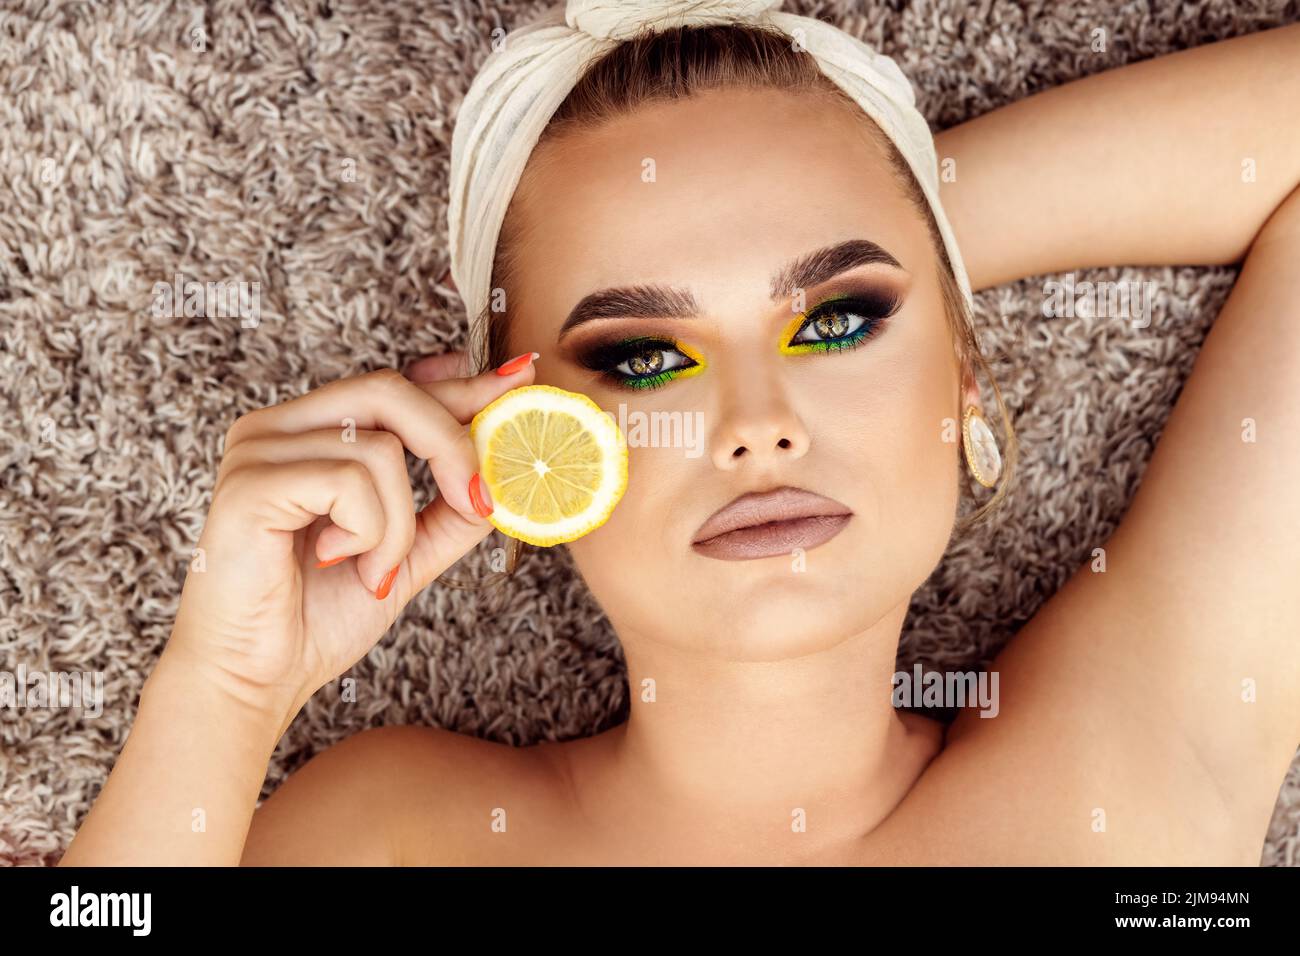 Beauty and skin care concept with gorgeous woman with perfect makeup covering one eye with organic lemon Stock Photo